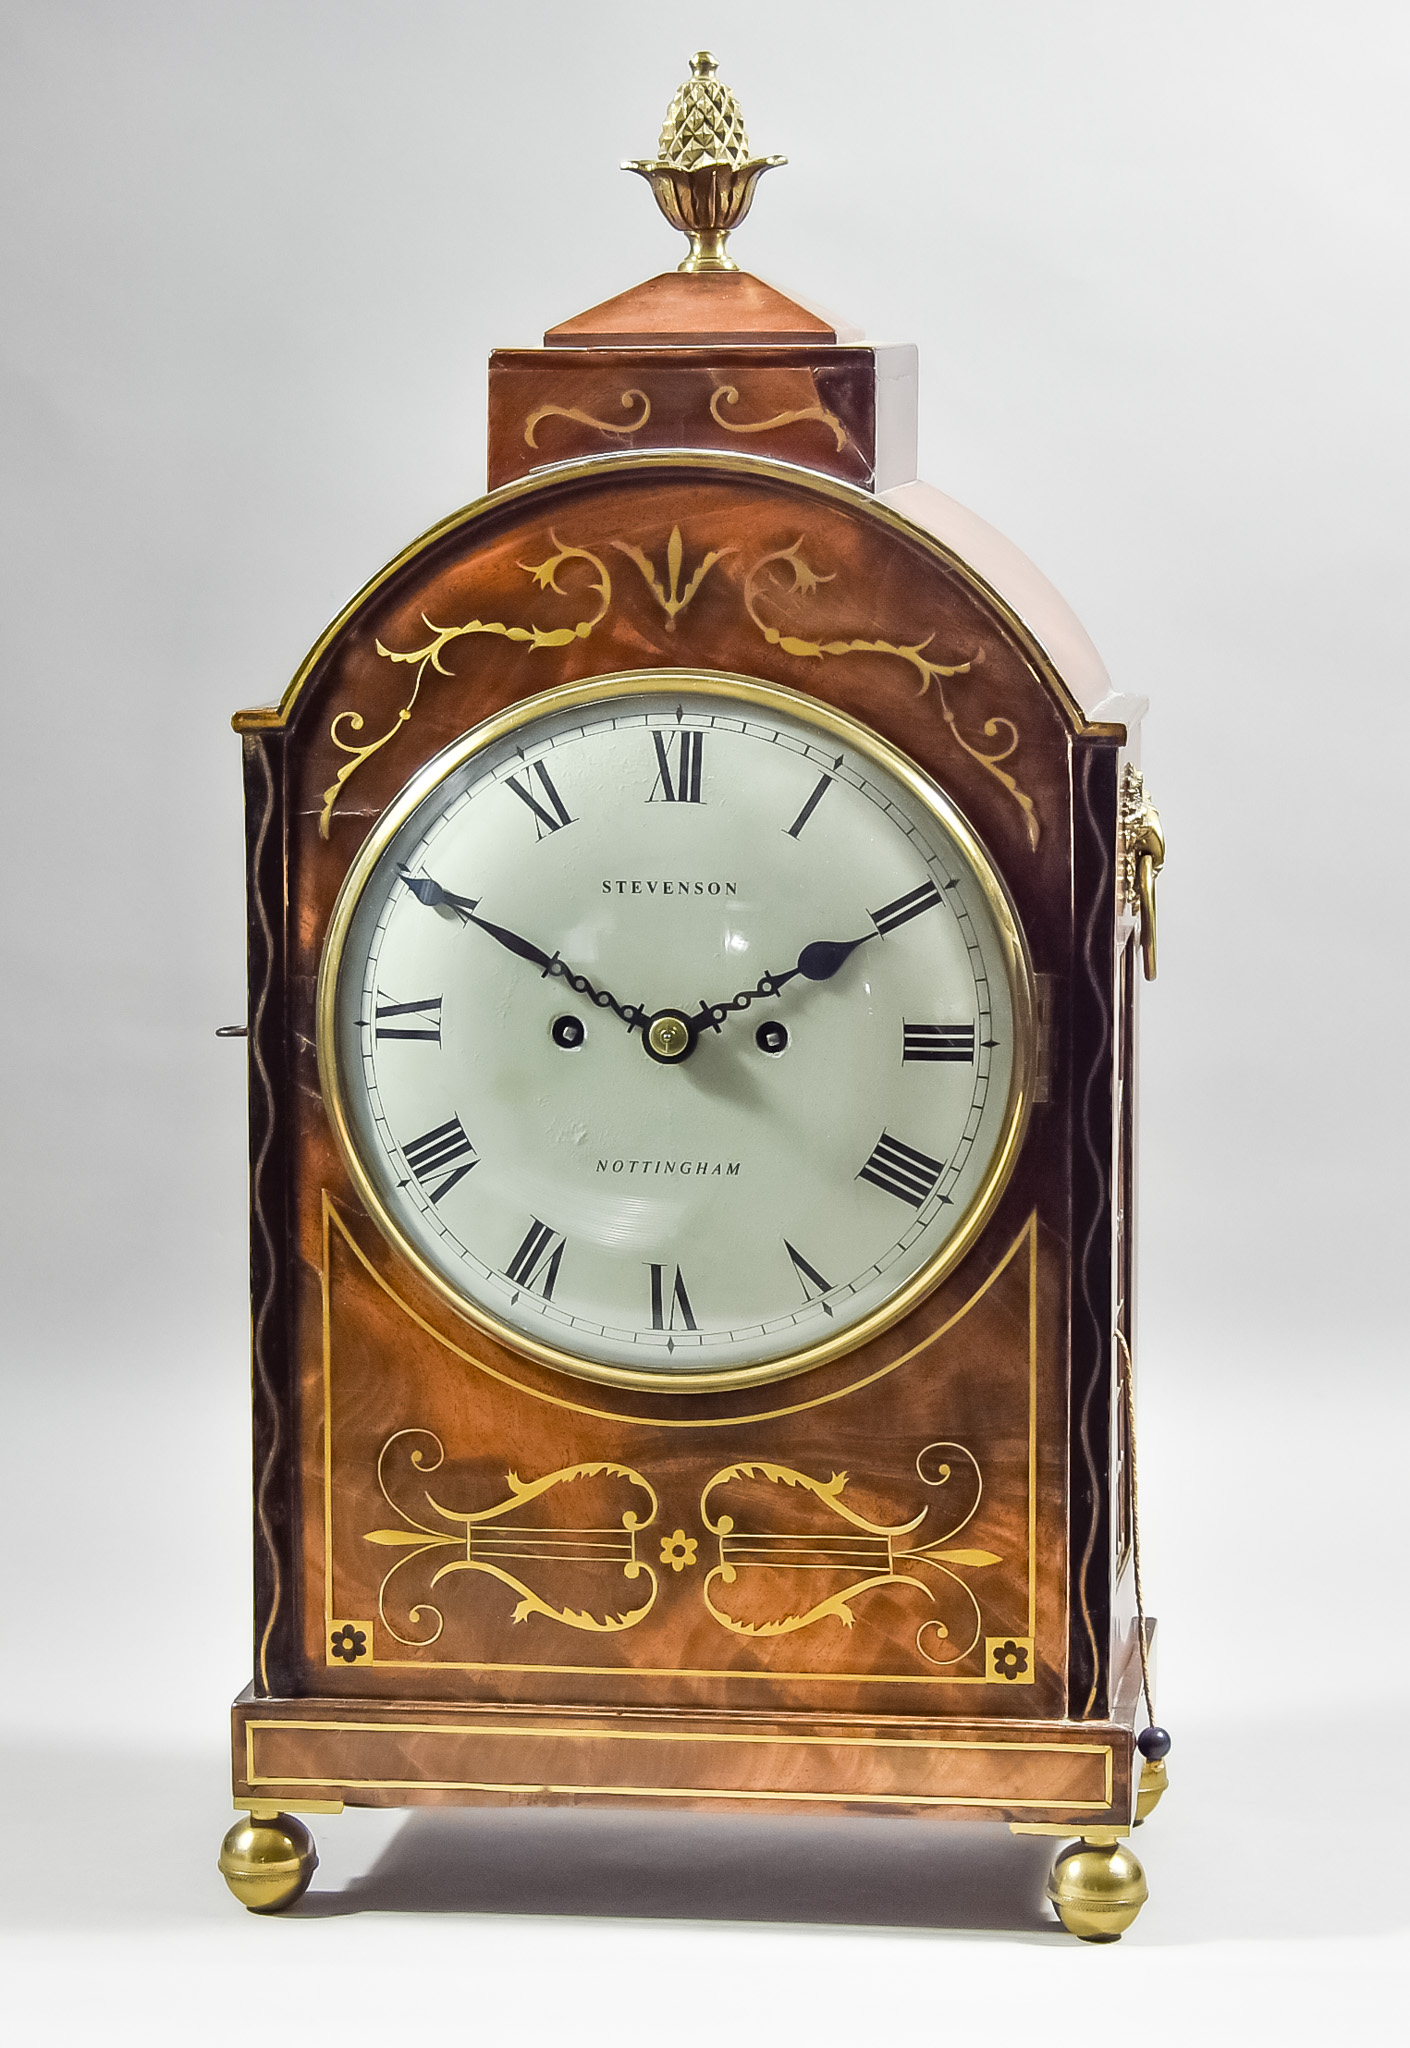 A 19th Century Mahogany Cased and Gilt Metal Mounted Mantle Clock by Stevenson of Nottingham, the